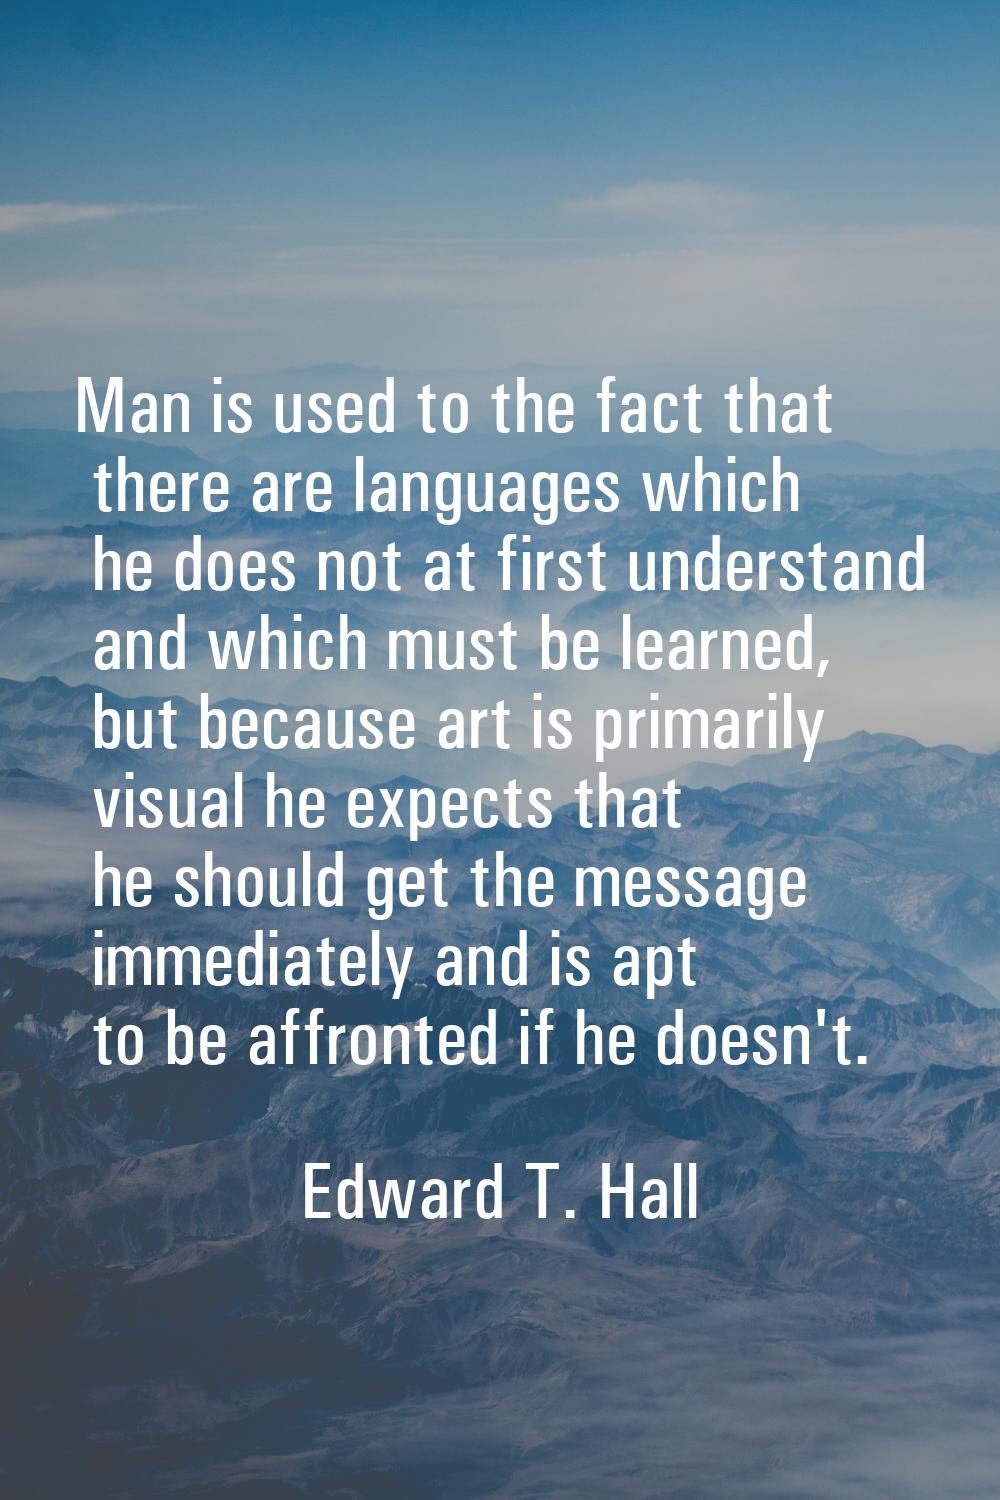 Man is used to the fact that there are languages which he does not at first understand and which mu